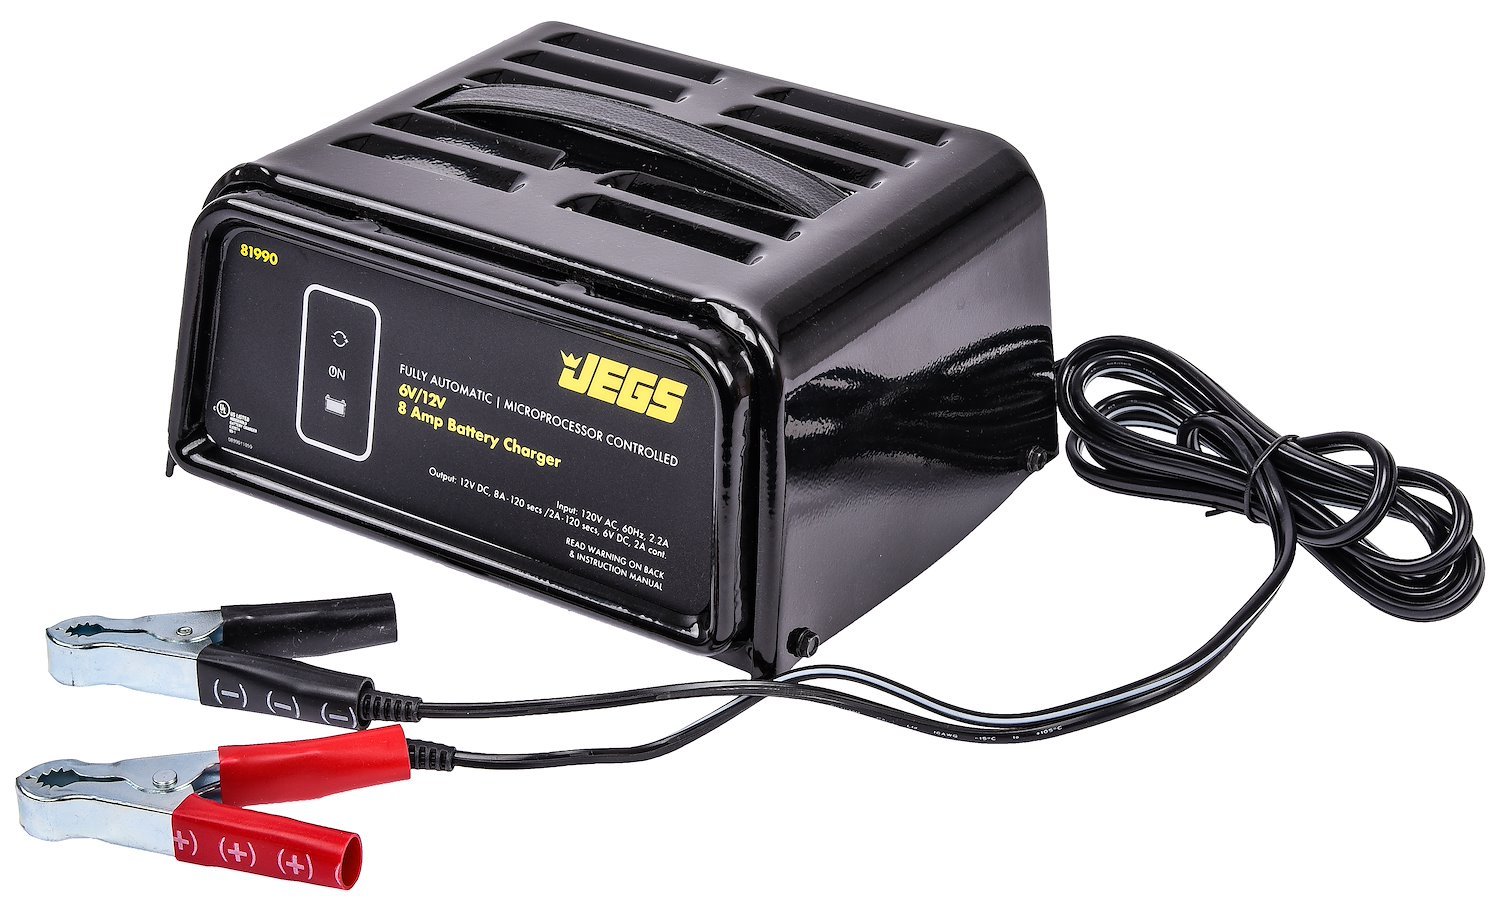 Battery Charger [2 or 8 Amp, 6 or 12 Volt]